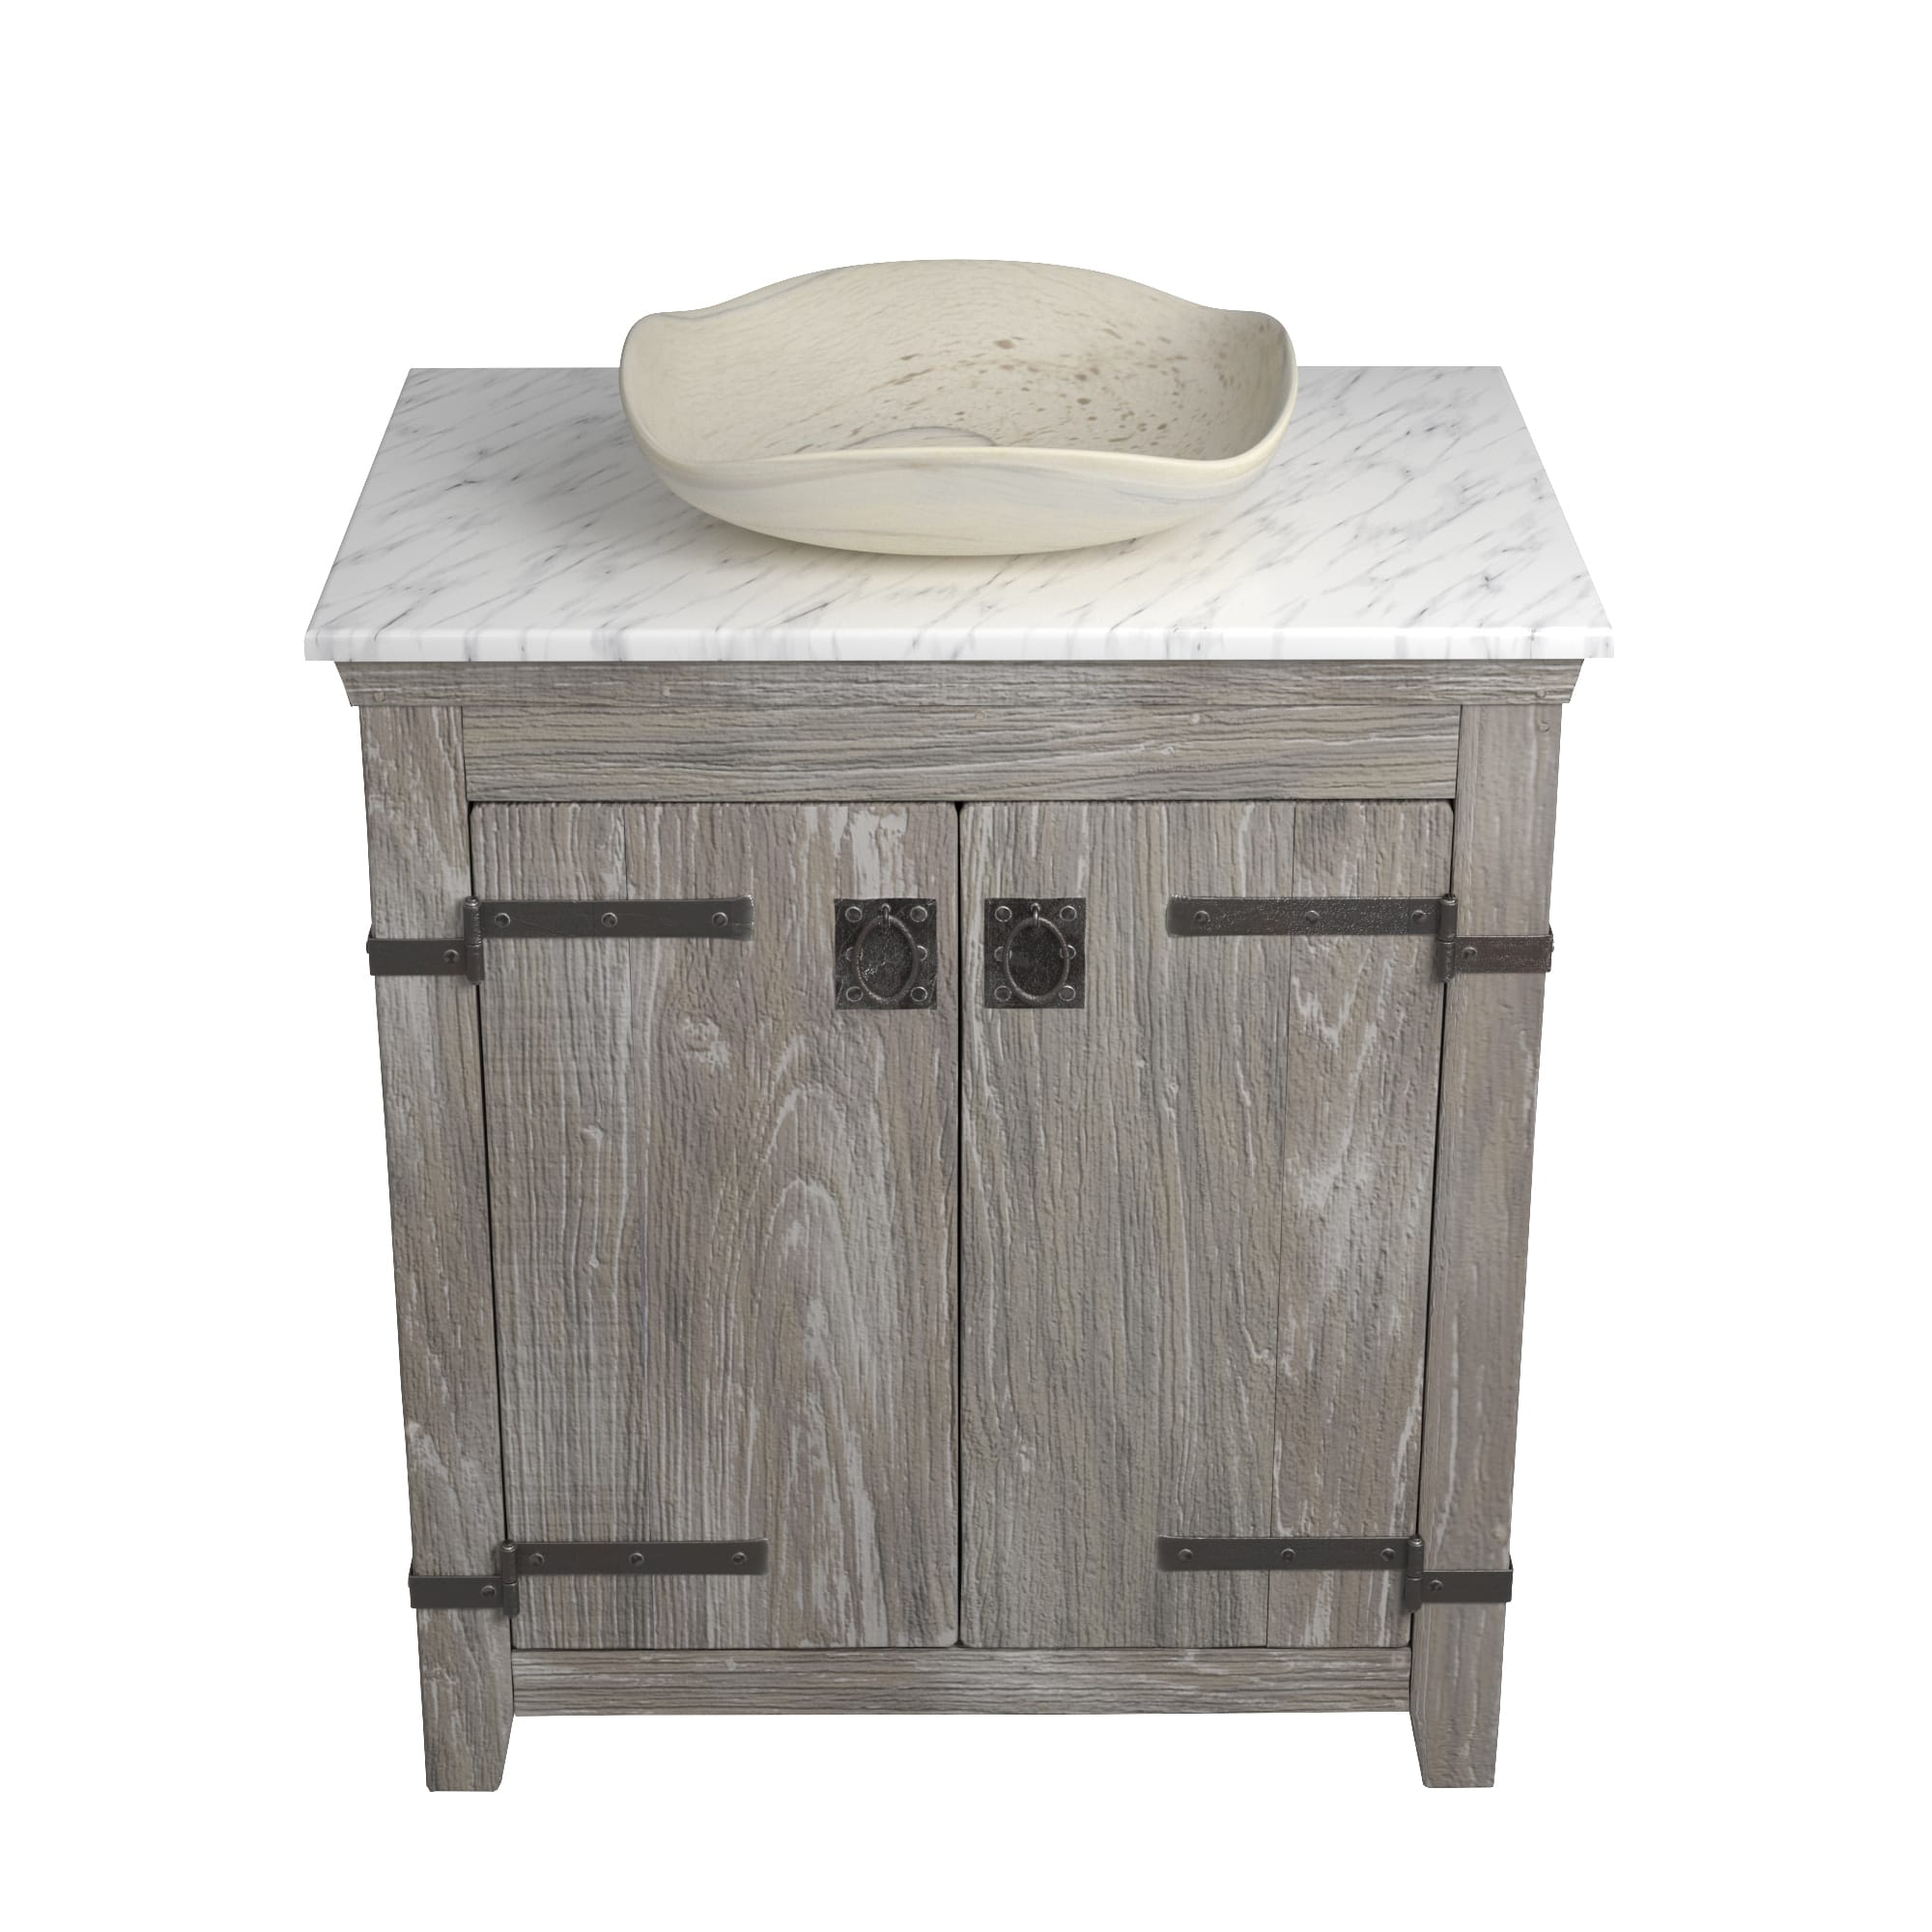 Native Trails 30" Americana Vanity in Driftwood with Carrara Marble Top and Lido in Beachcomber, No Faucet Hole, BND30-VB-CT-MG-024